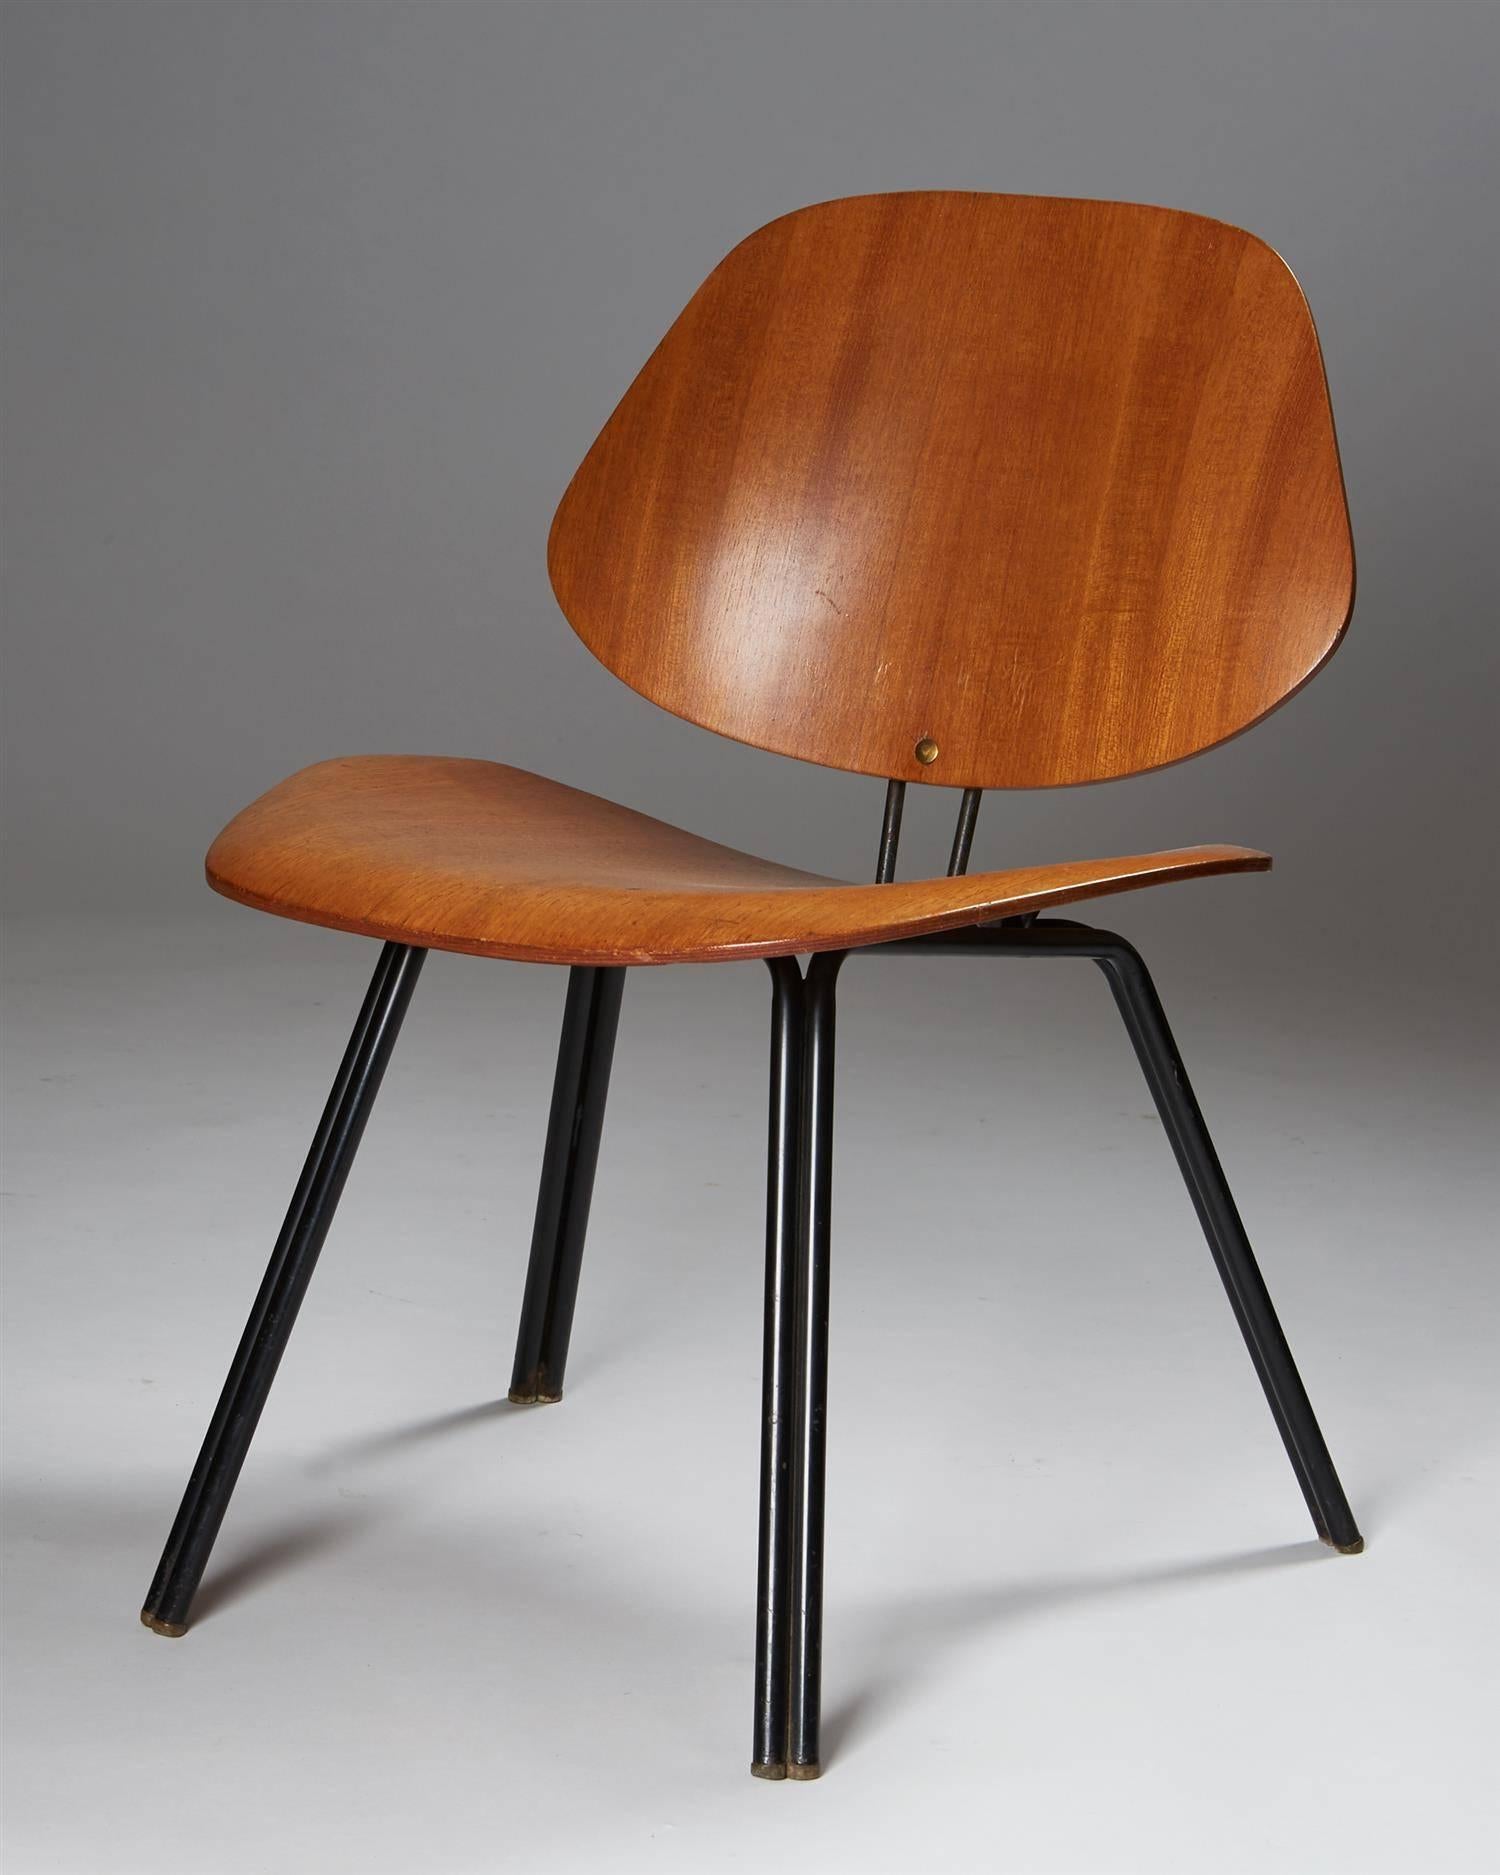 Chair, designed by Osvaldo Borsani for Techno,	
Italy. 1950’s.

Plywood and lacquered steel.
